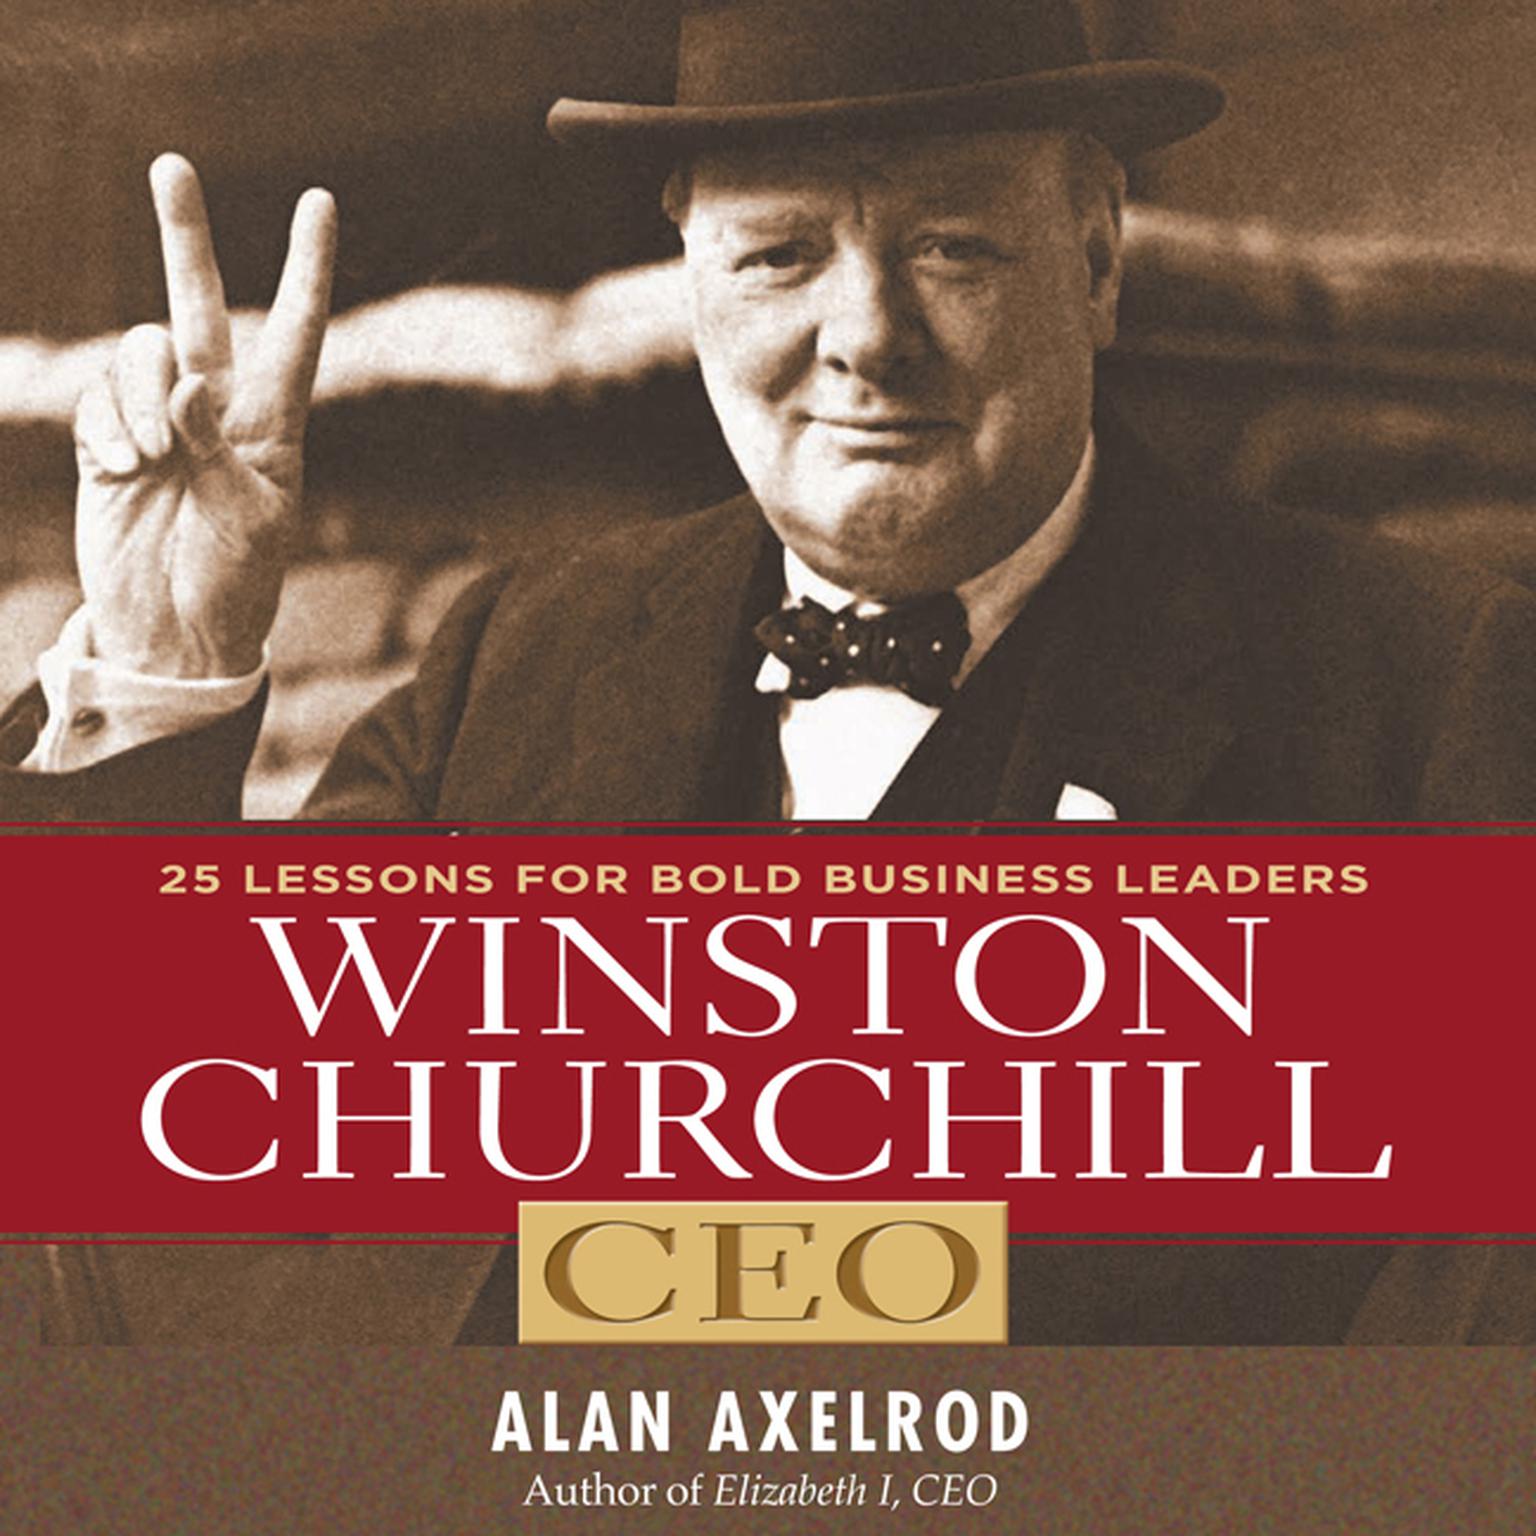 Winston Churchill CEO: 25 Lessons for Bold Business Leaders Audiobook, by Alan Axelrod